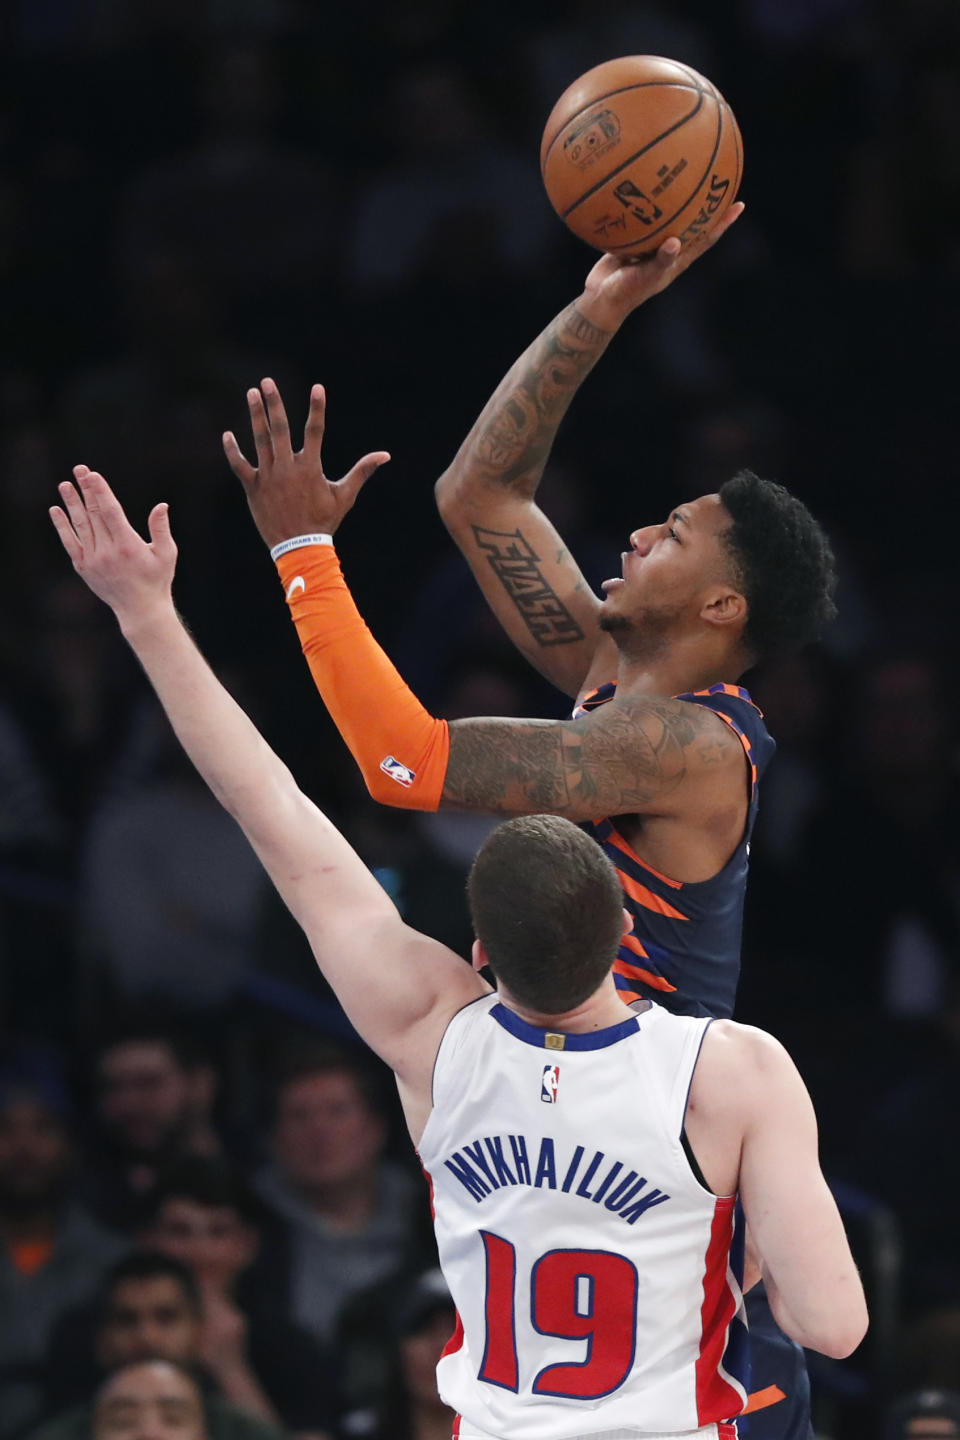 New York Knicks guard Elfrid Payton, right, shoots with Detroit Pistons guard Sviatoslav Mykhailiuk (19) defending during the first half of an NBA basketball game in New York, Sunday, March 8, 2020. (AP Photo/Kathy Willens)